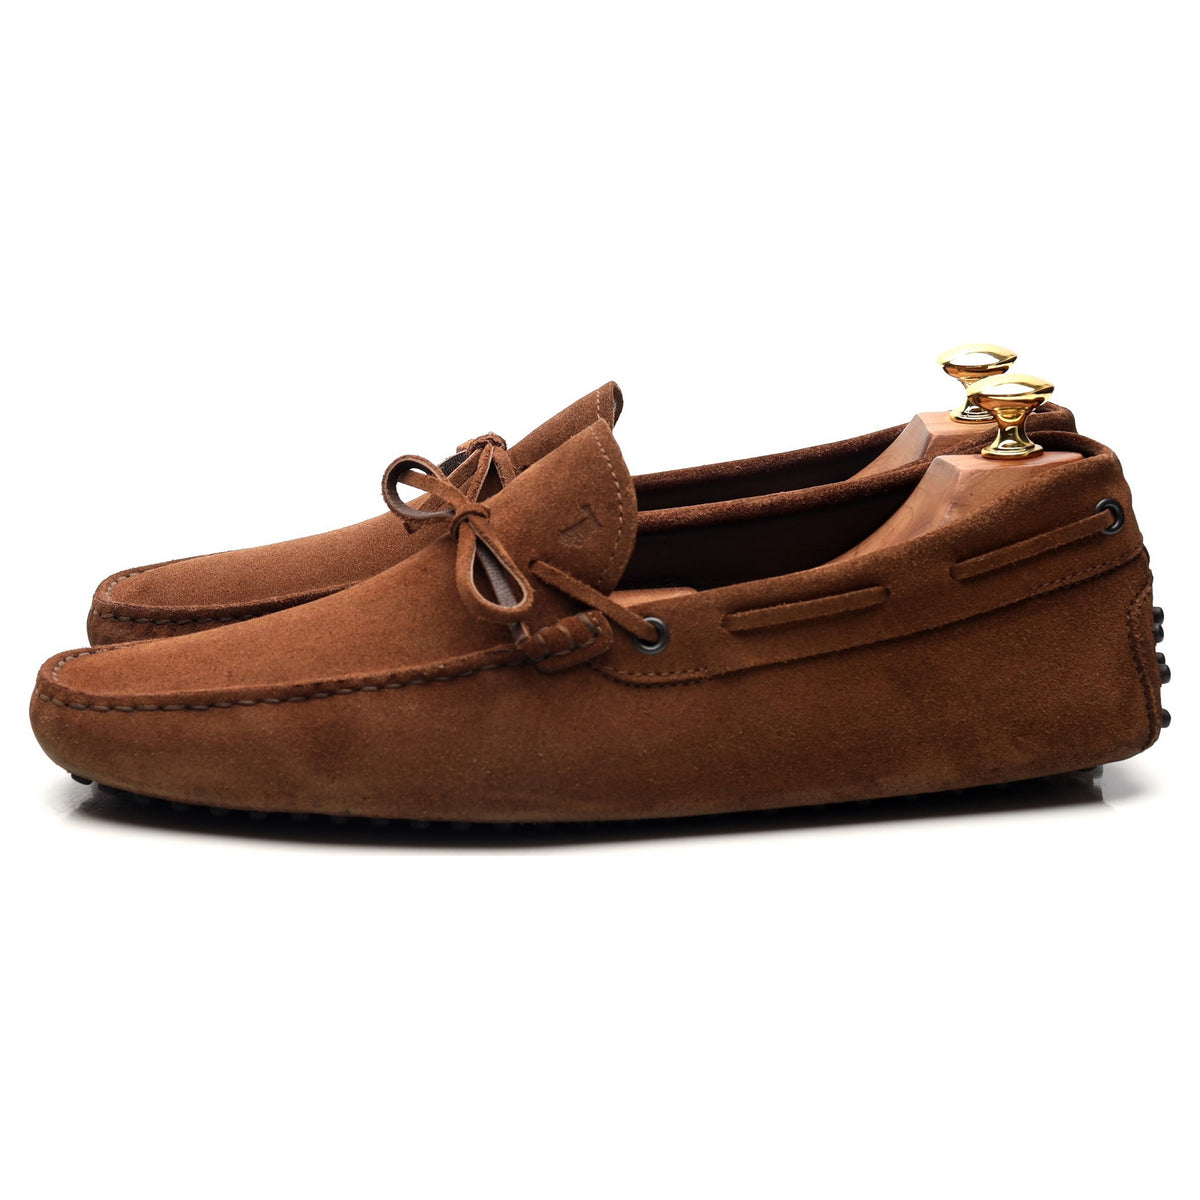 Gommino Brown Suede Driving Loafers UK 9.5